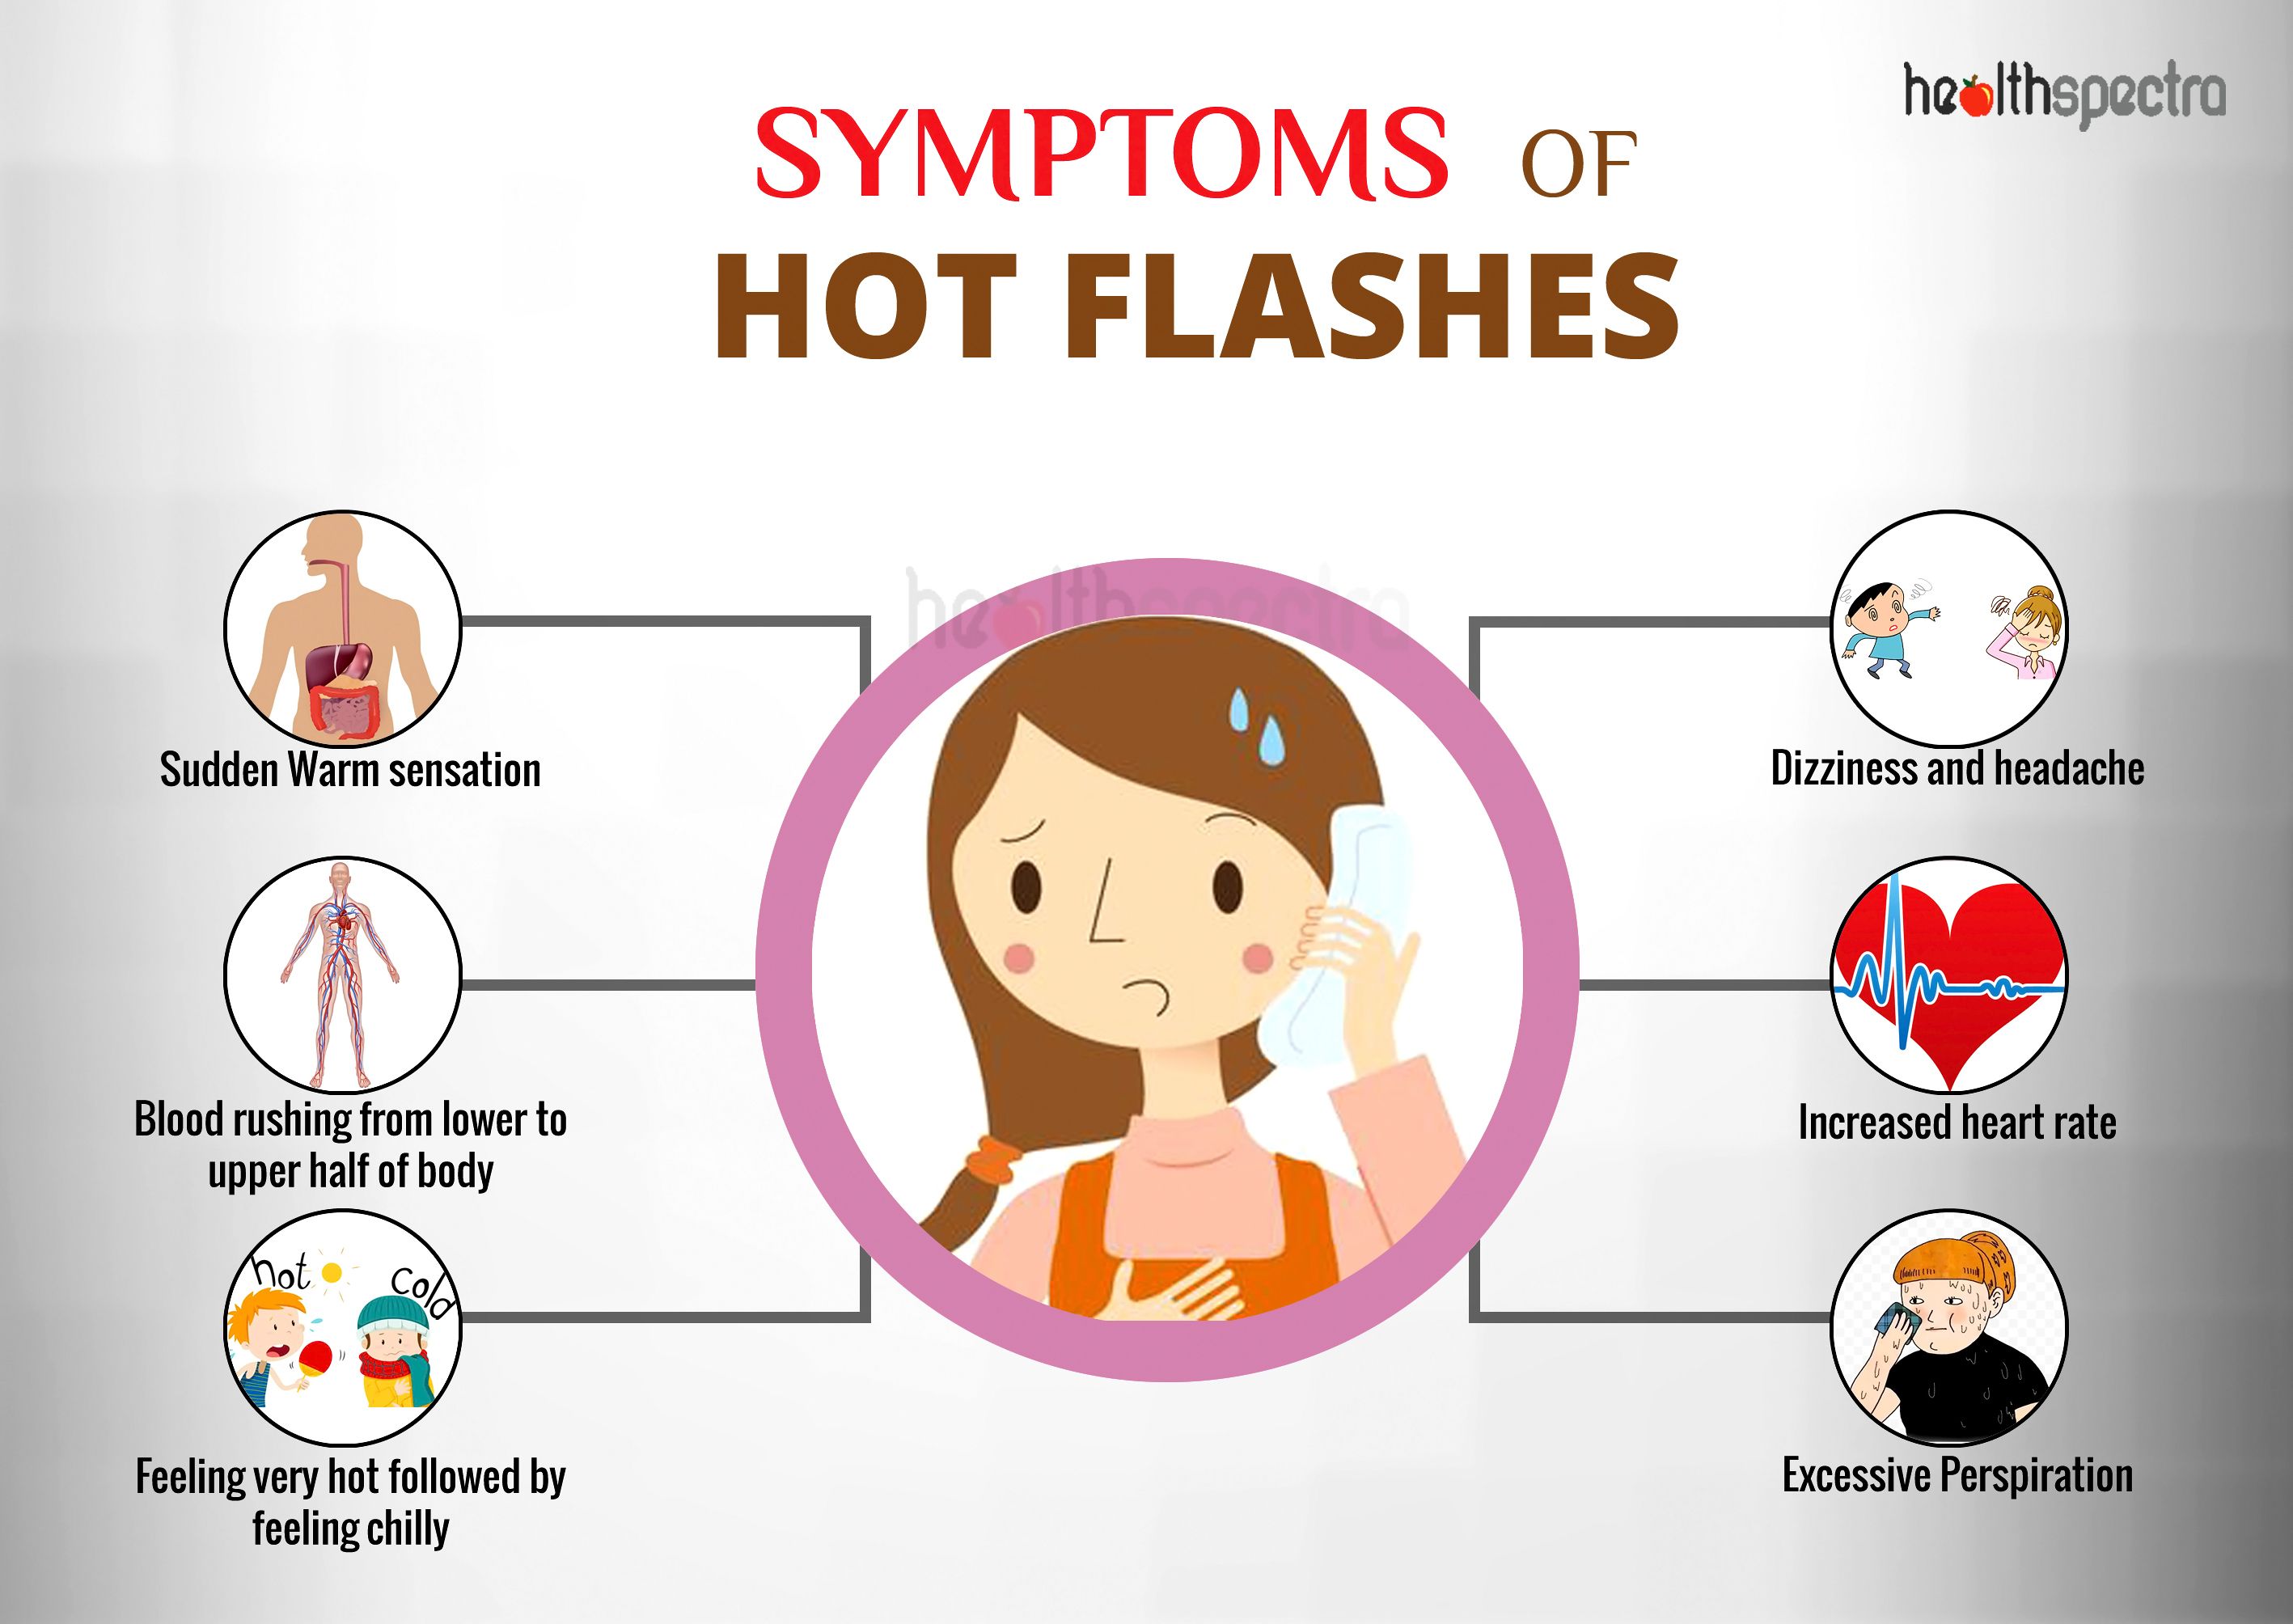 Symptoms of Hot Flashes